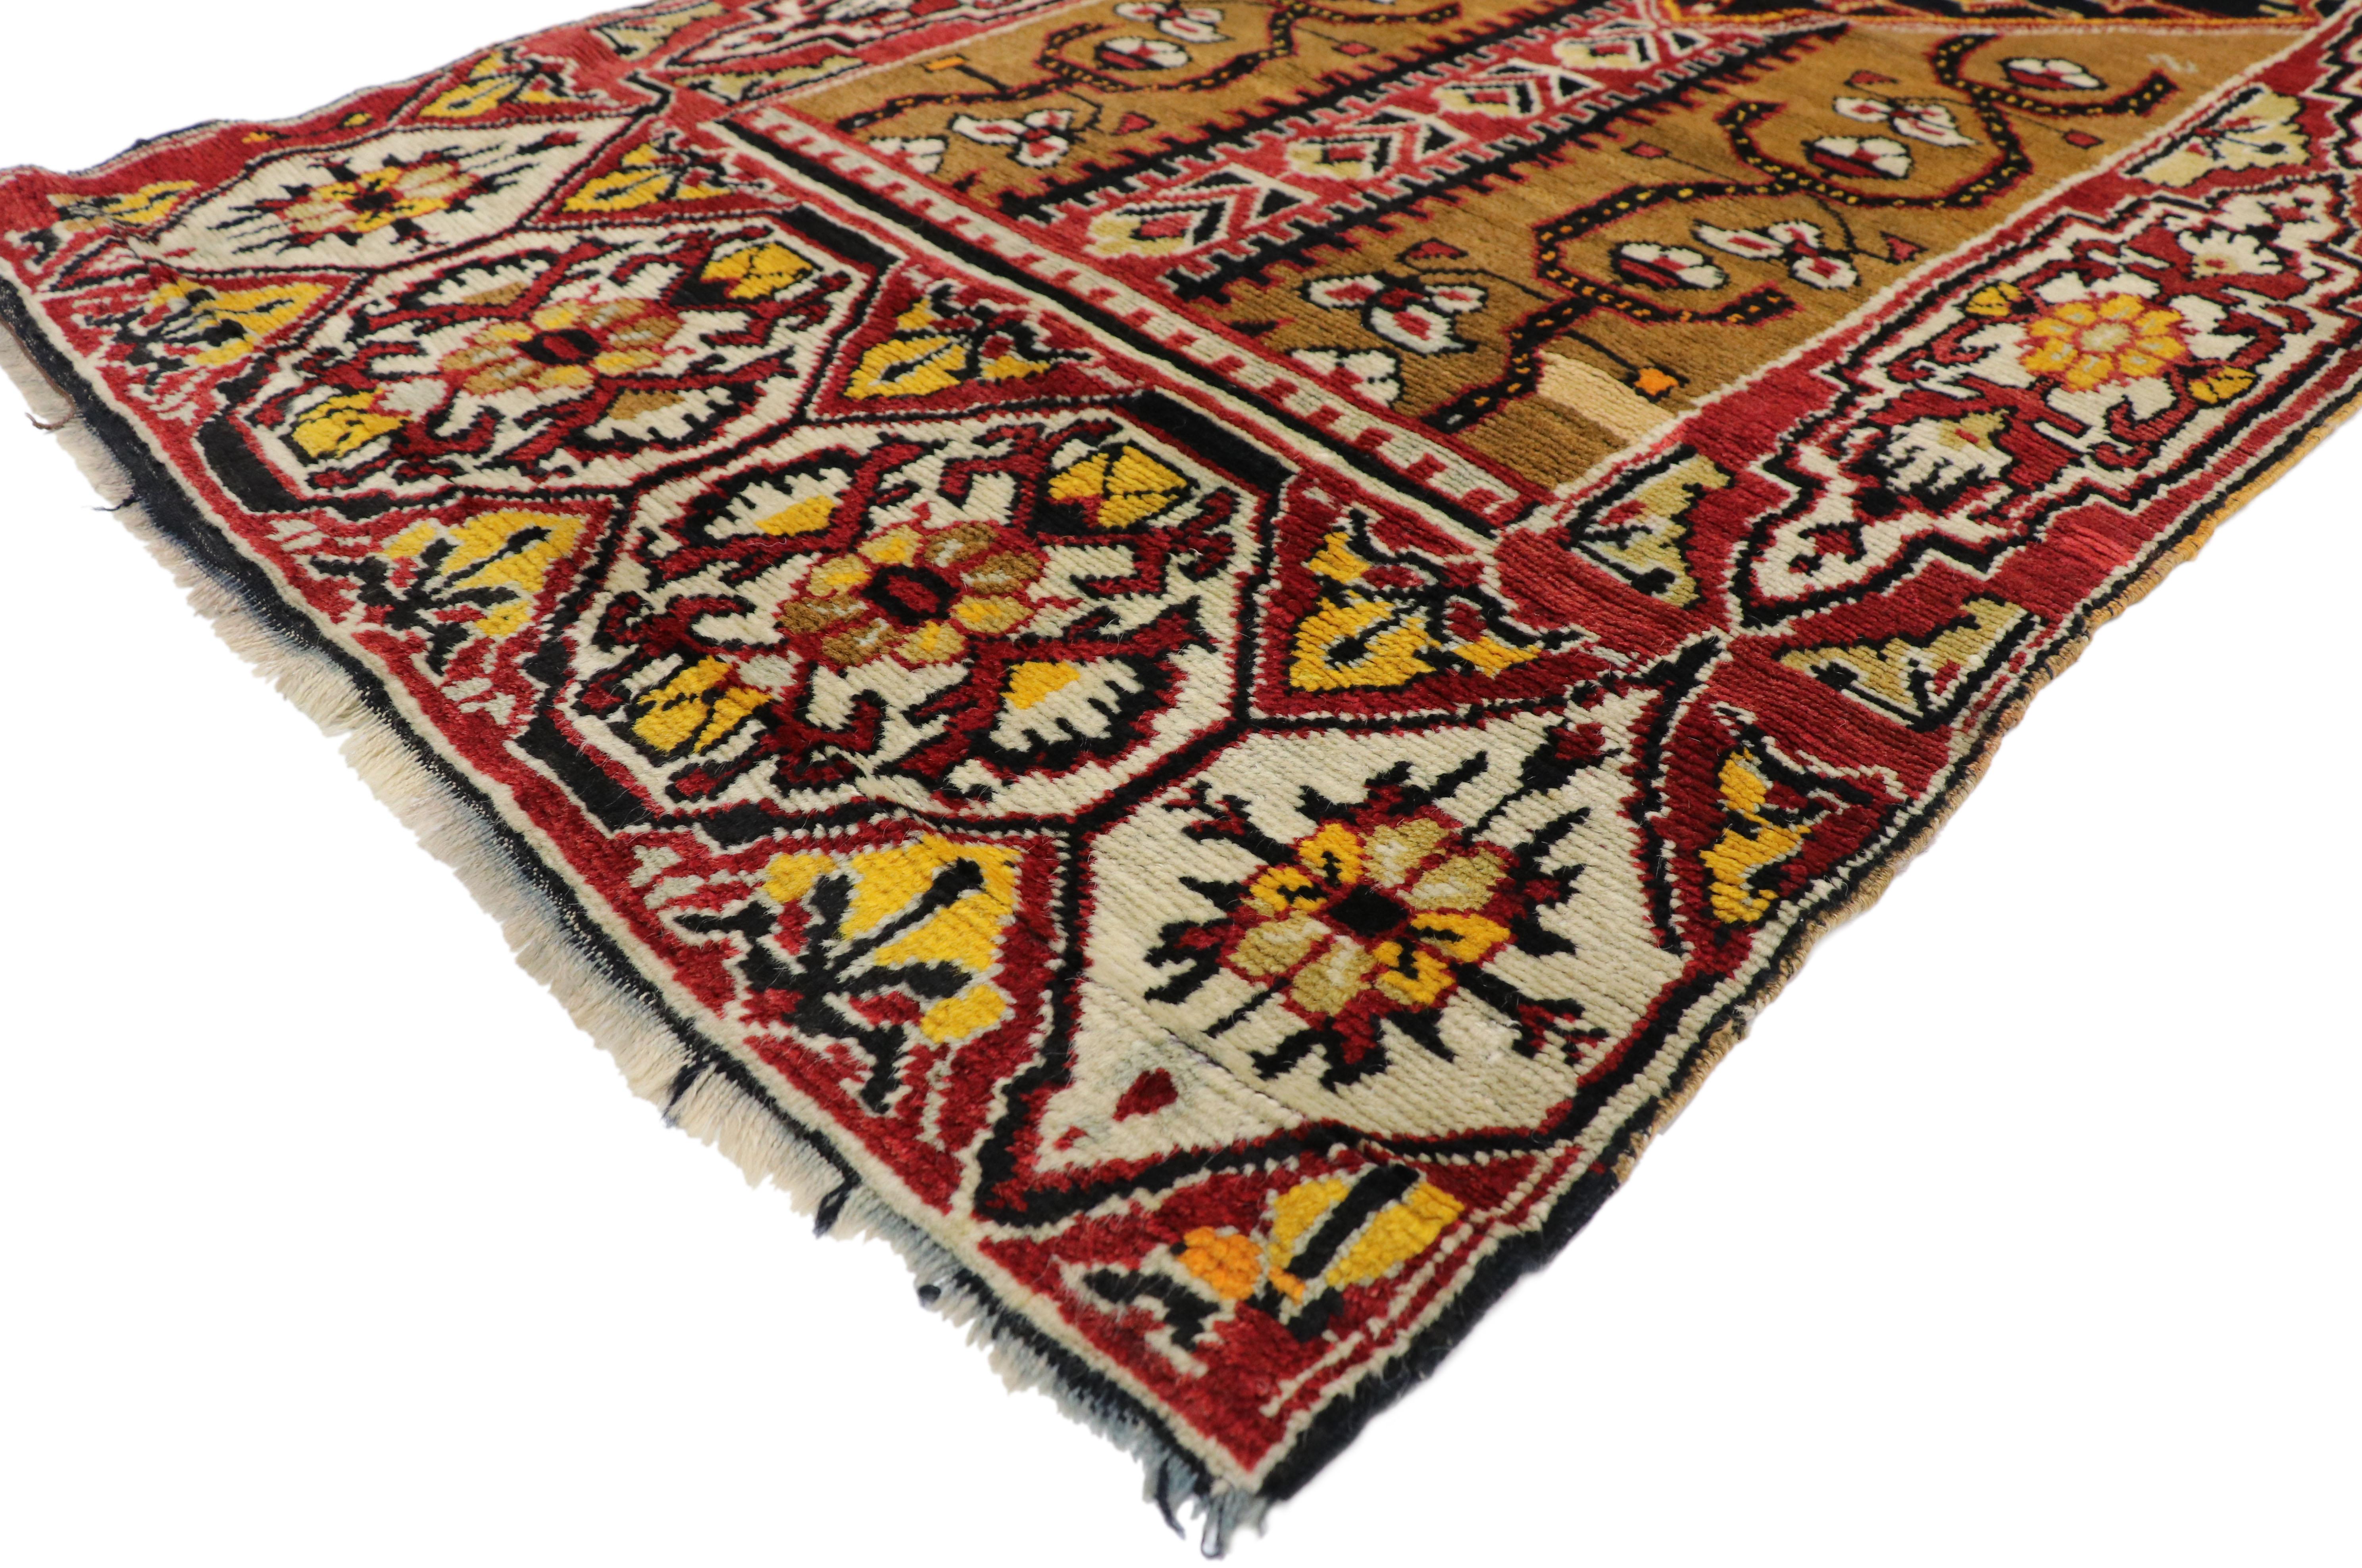 52196 distressed antique Turkish Oushak Hallway runner with Artisan Tribal style. Full of character and stately presence, this hand-knotted wool antique Turkish Oushak runner with Modern style features an intrinsic geometric pattern composed of two